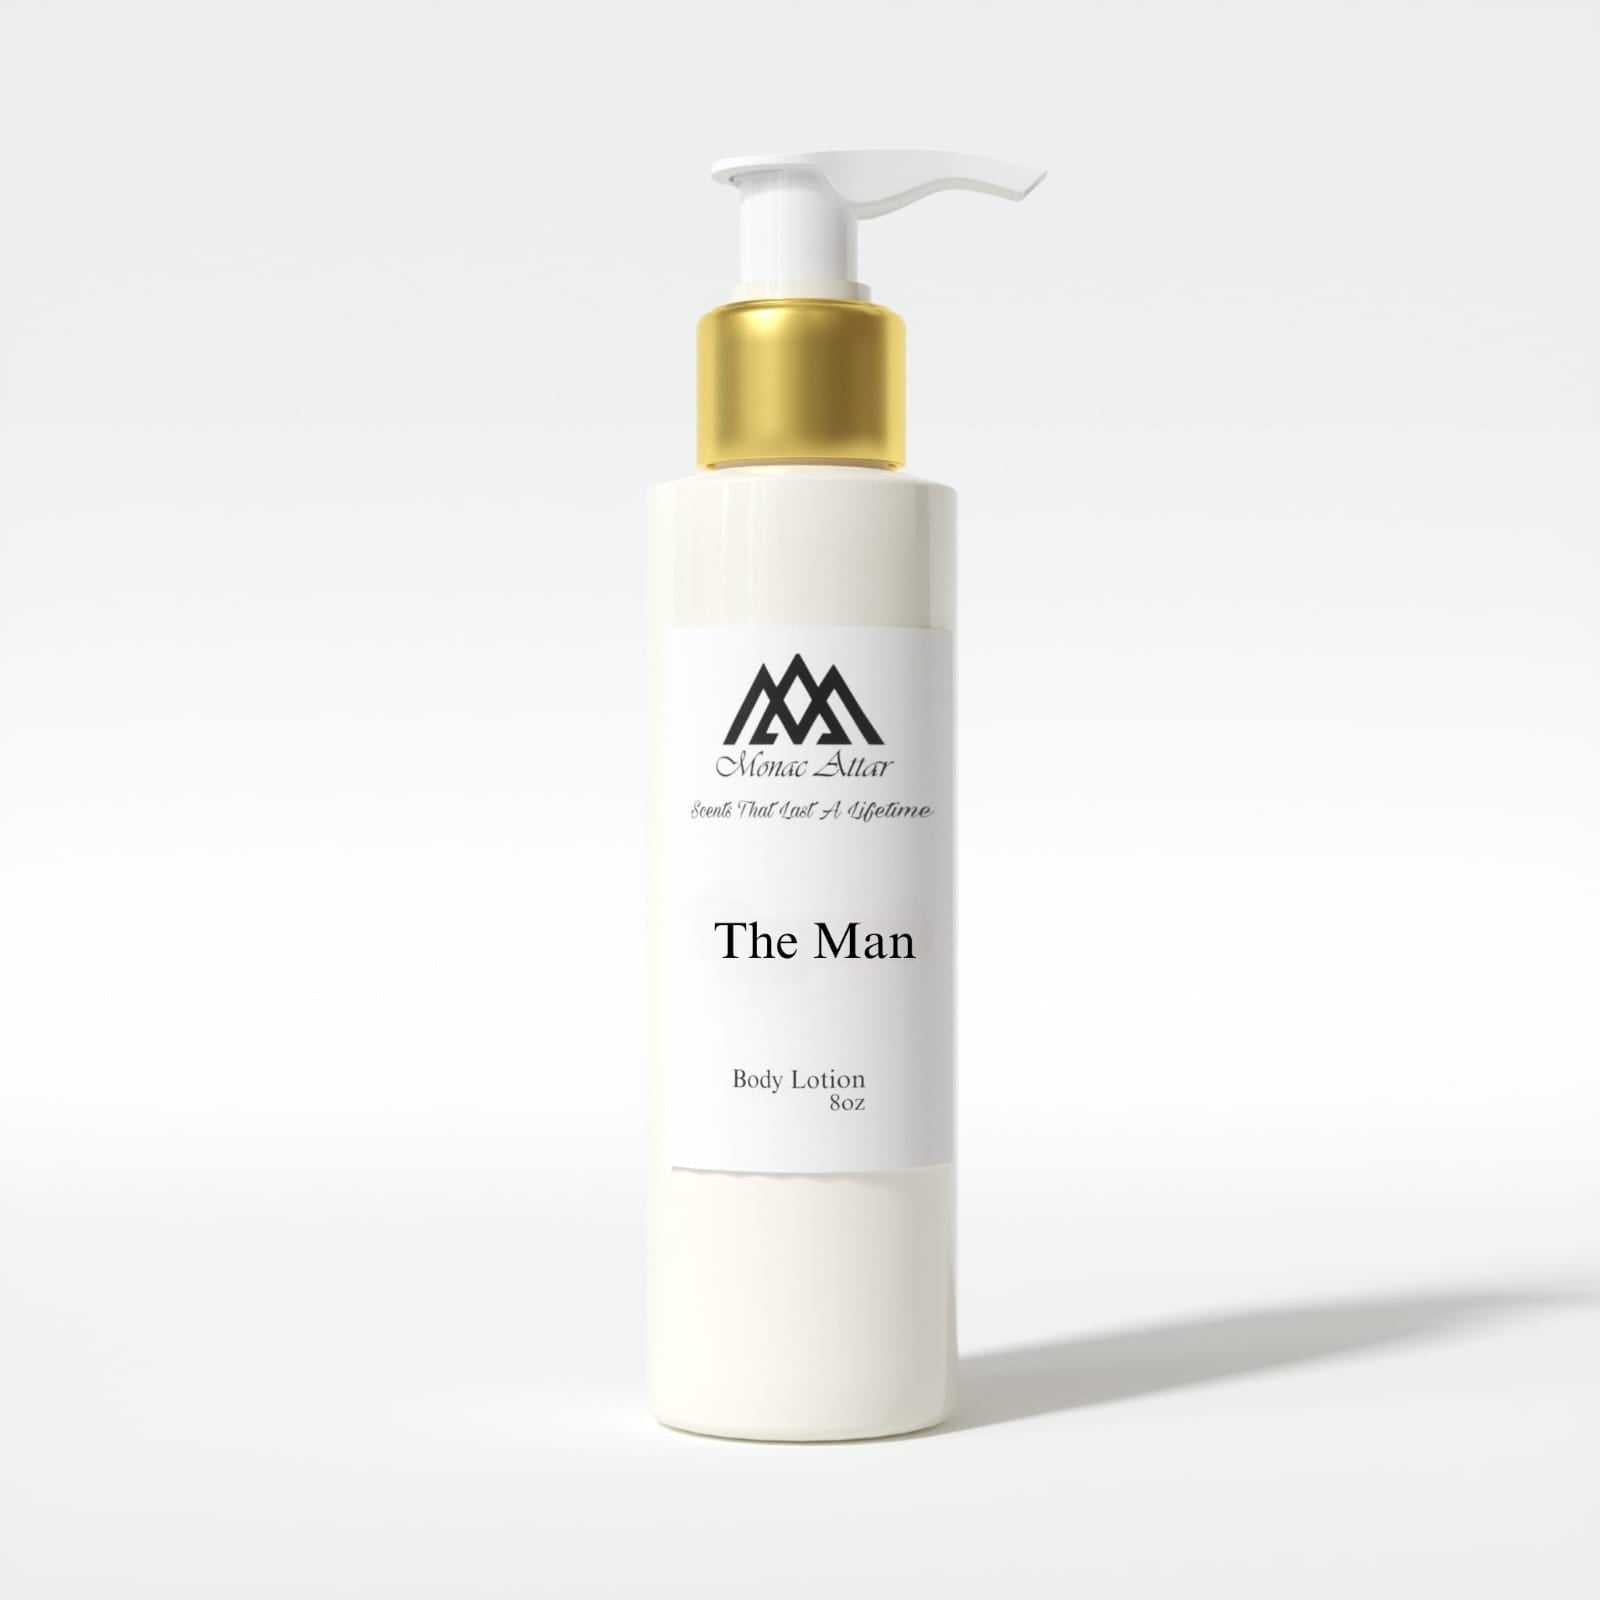 The Man Body Lotion Inspired by Jean Paul Gualtier Le Male dupe